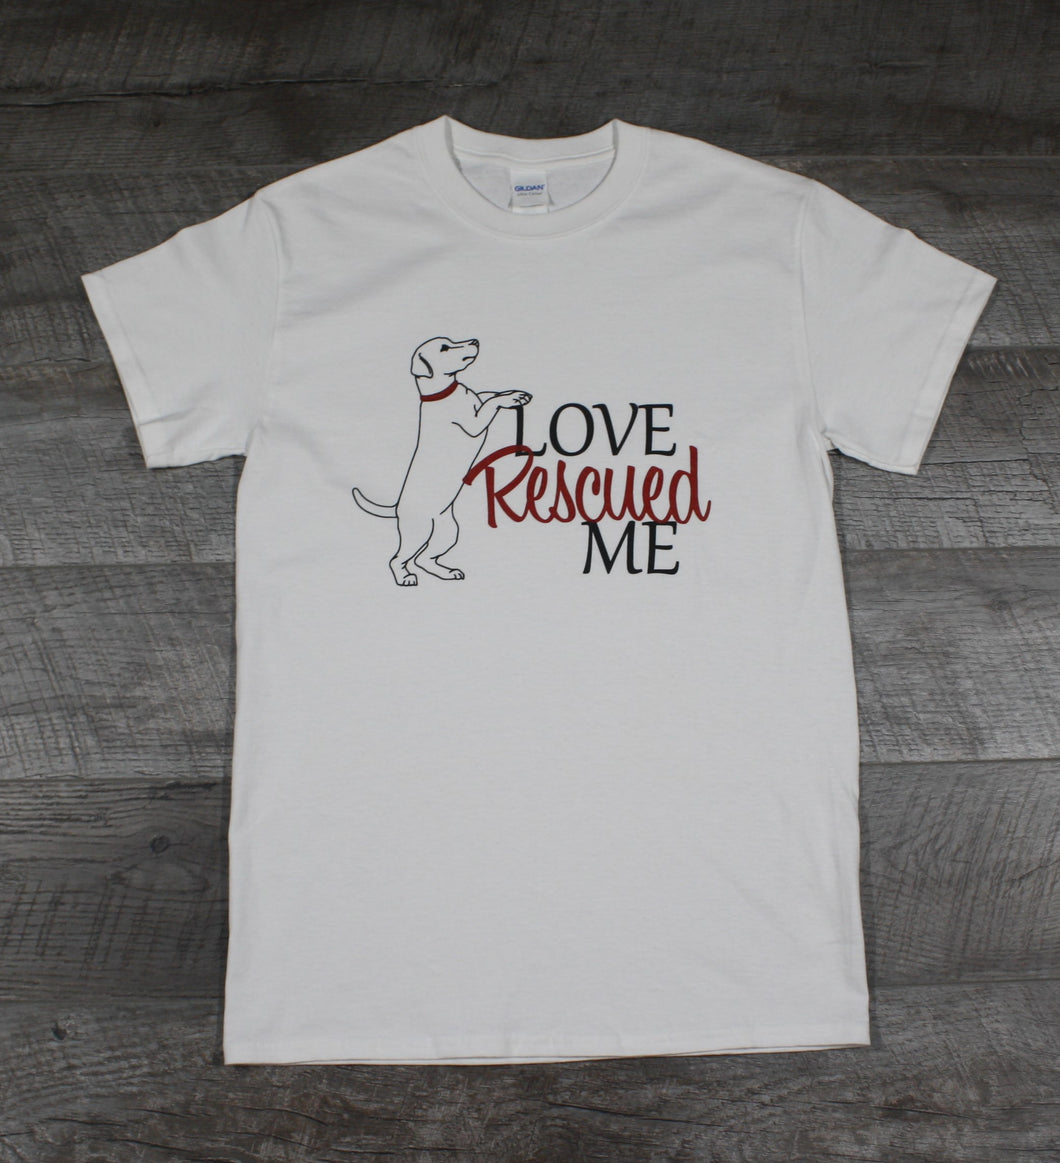 Love Rescued Me Tshirt, Dogs, Animal Lovers, Color Variations Available in White and Mint Green